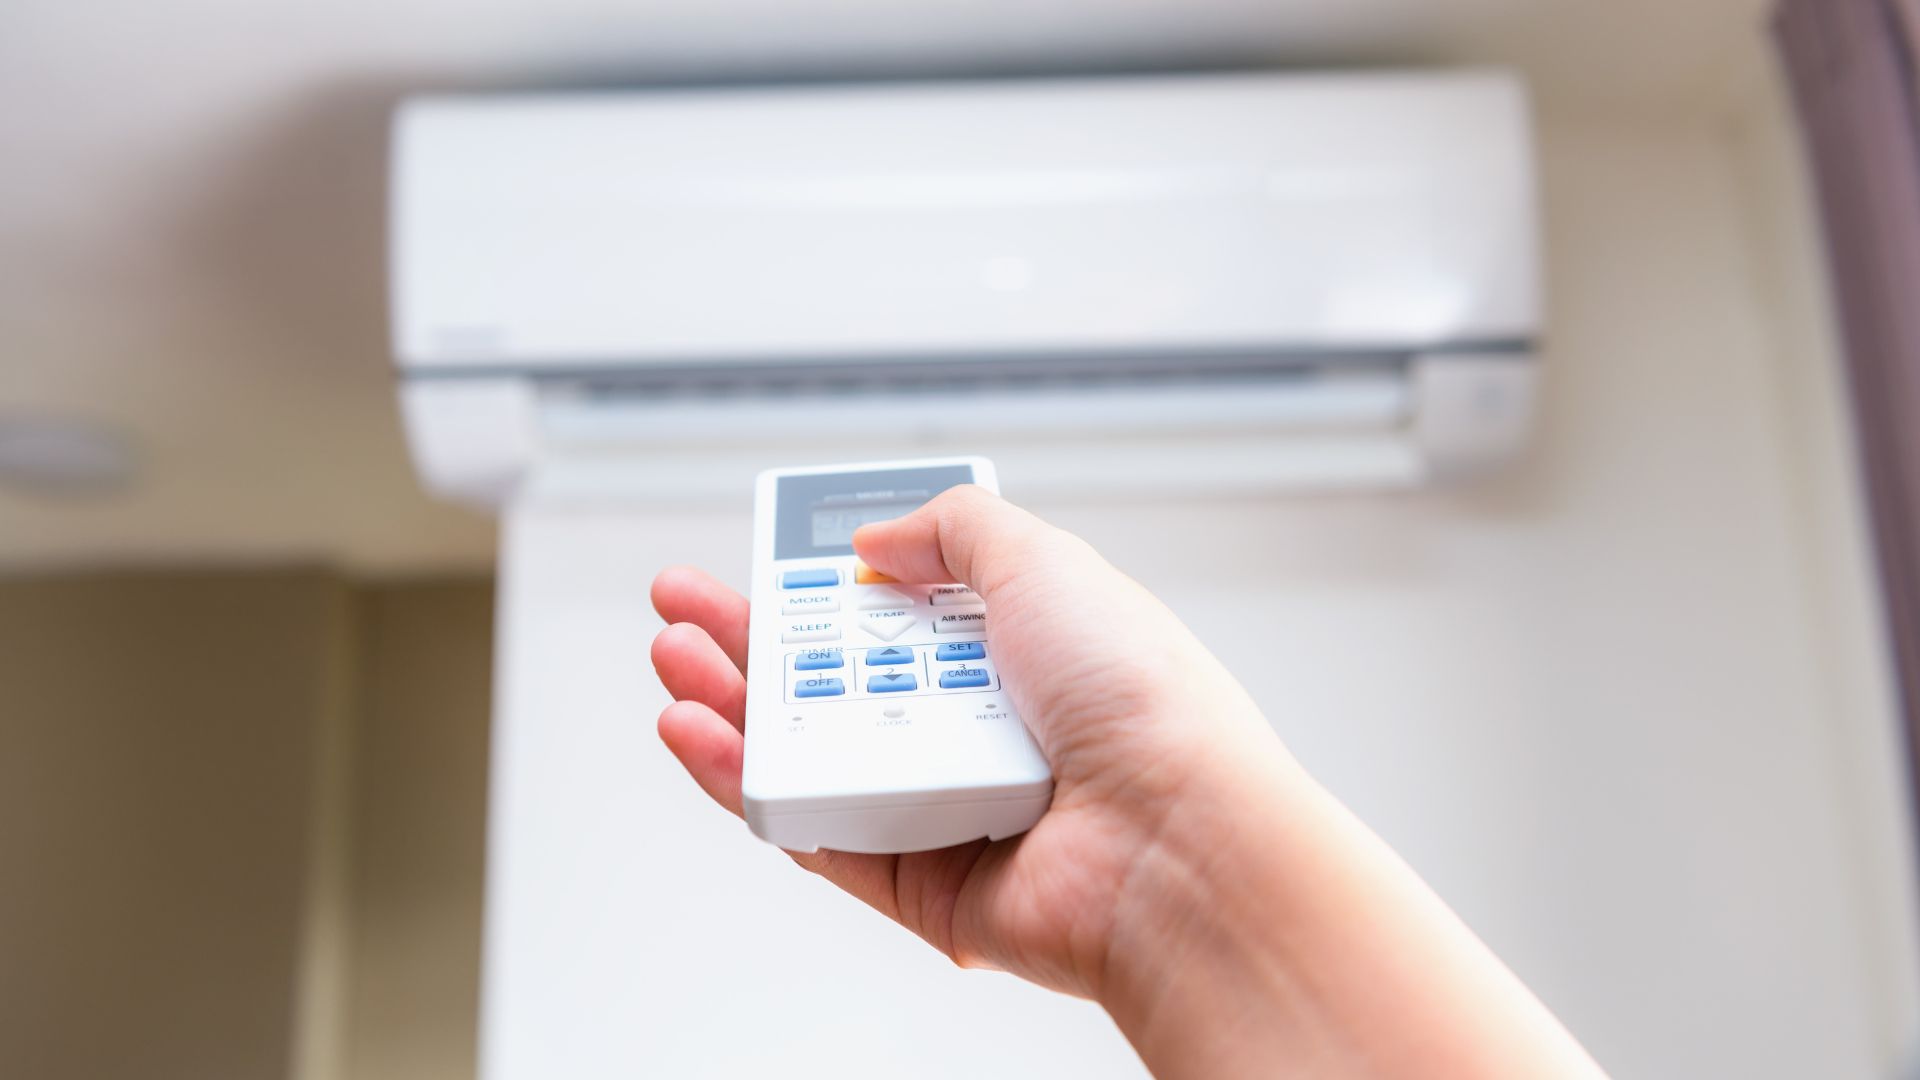 How to reset an air conditioner